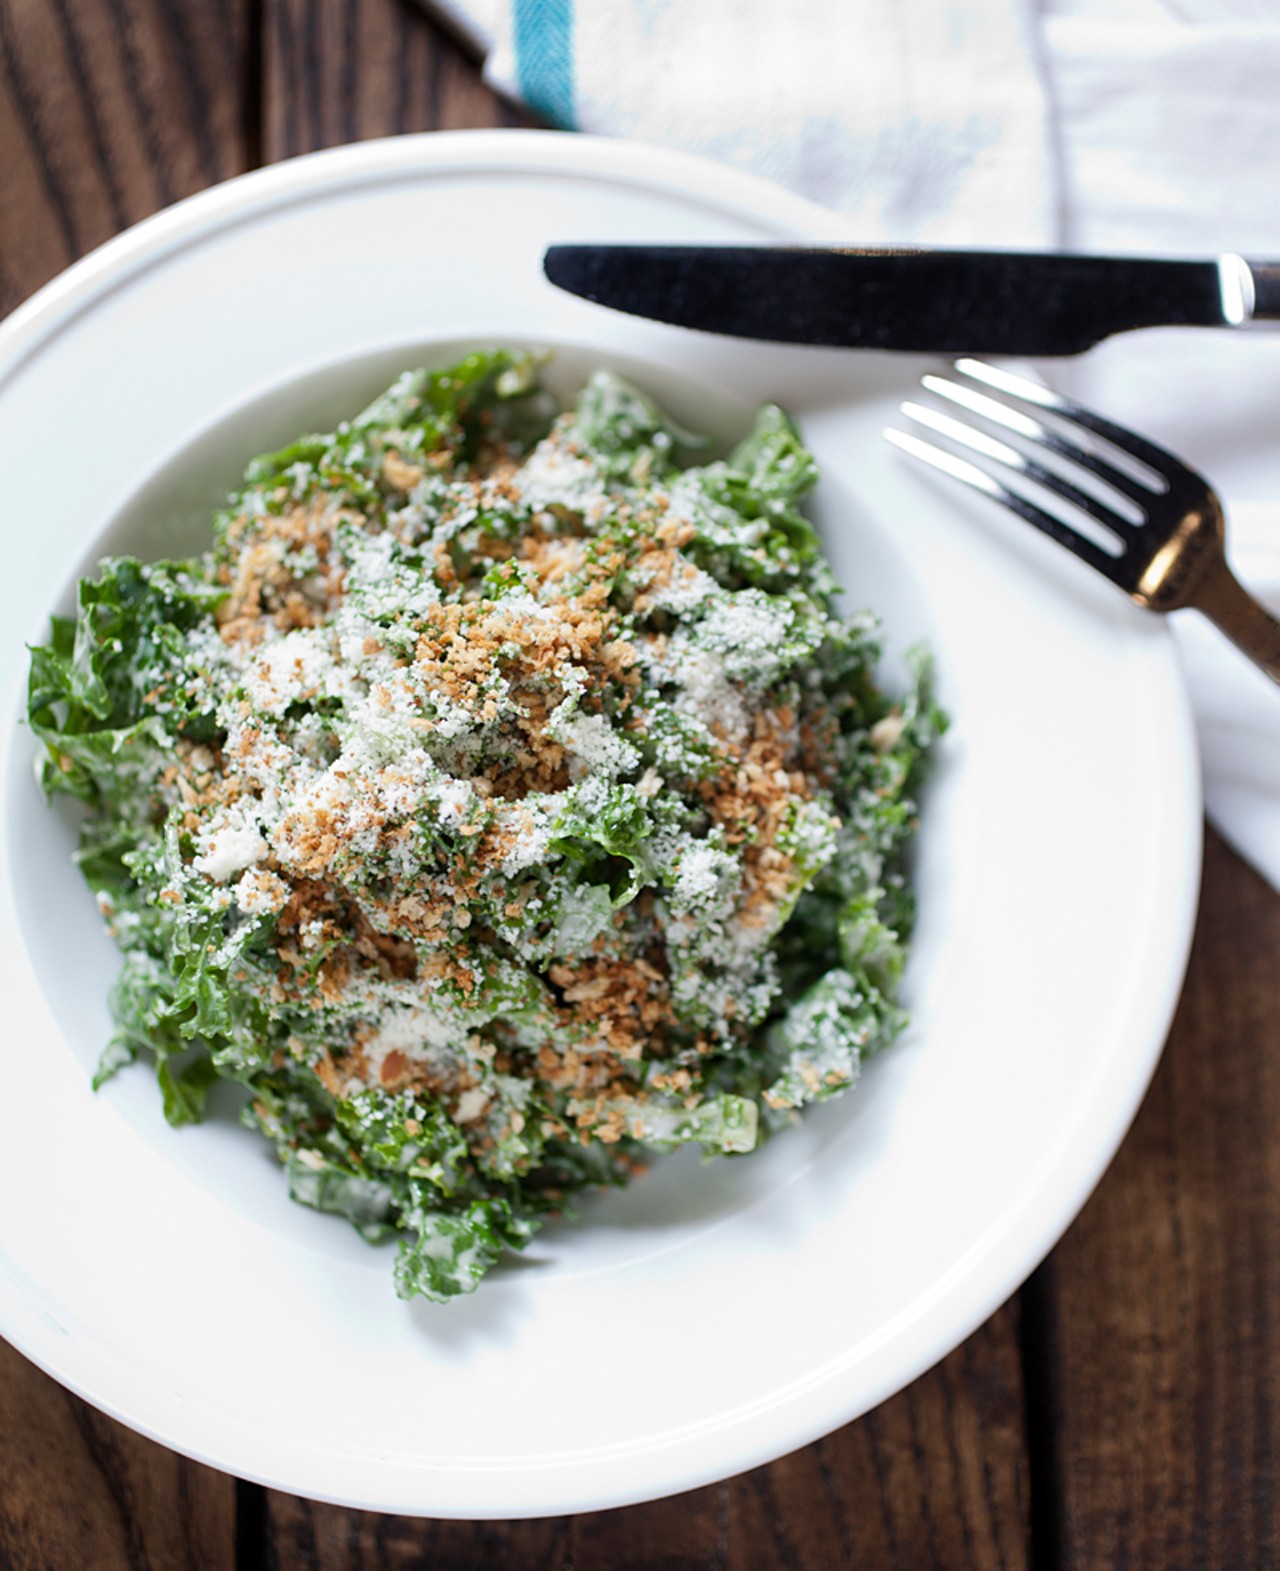 Shaved kale salad with creamy anchovy dressing, pecorino and breadcrumbs.